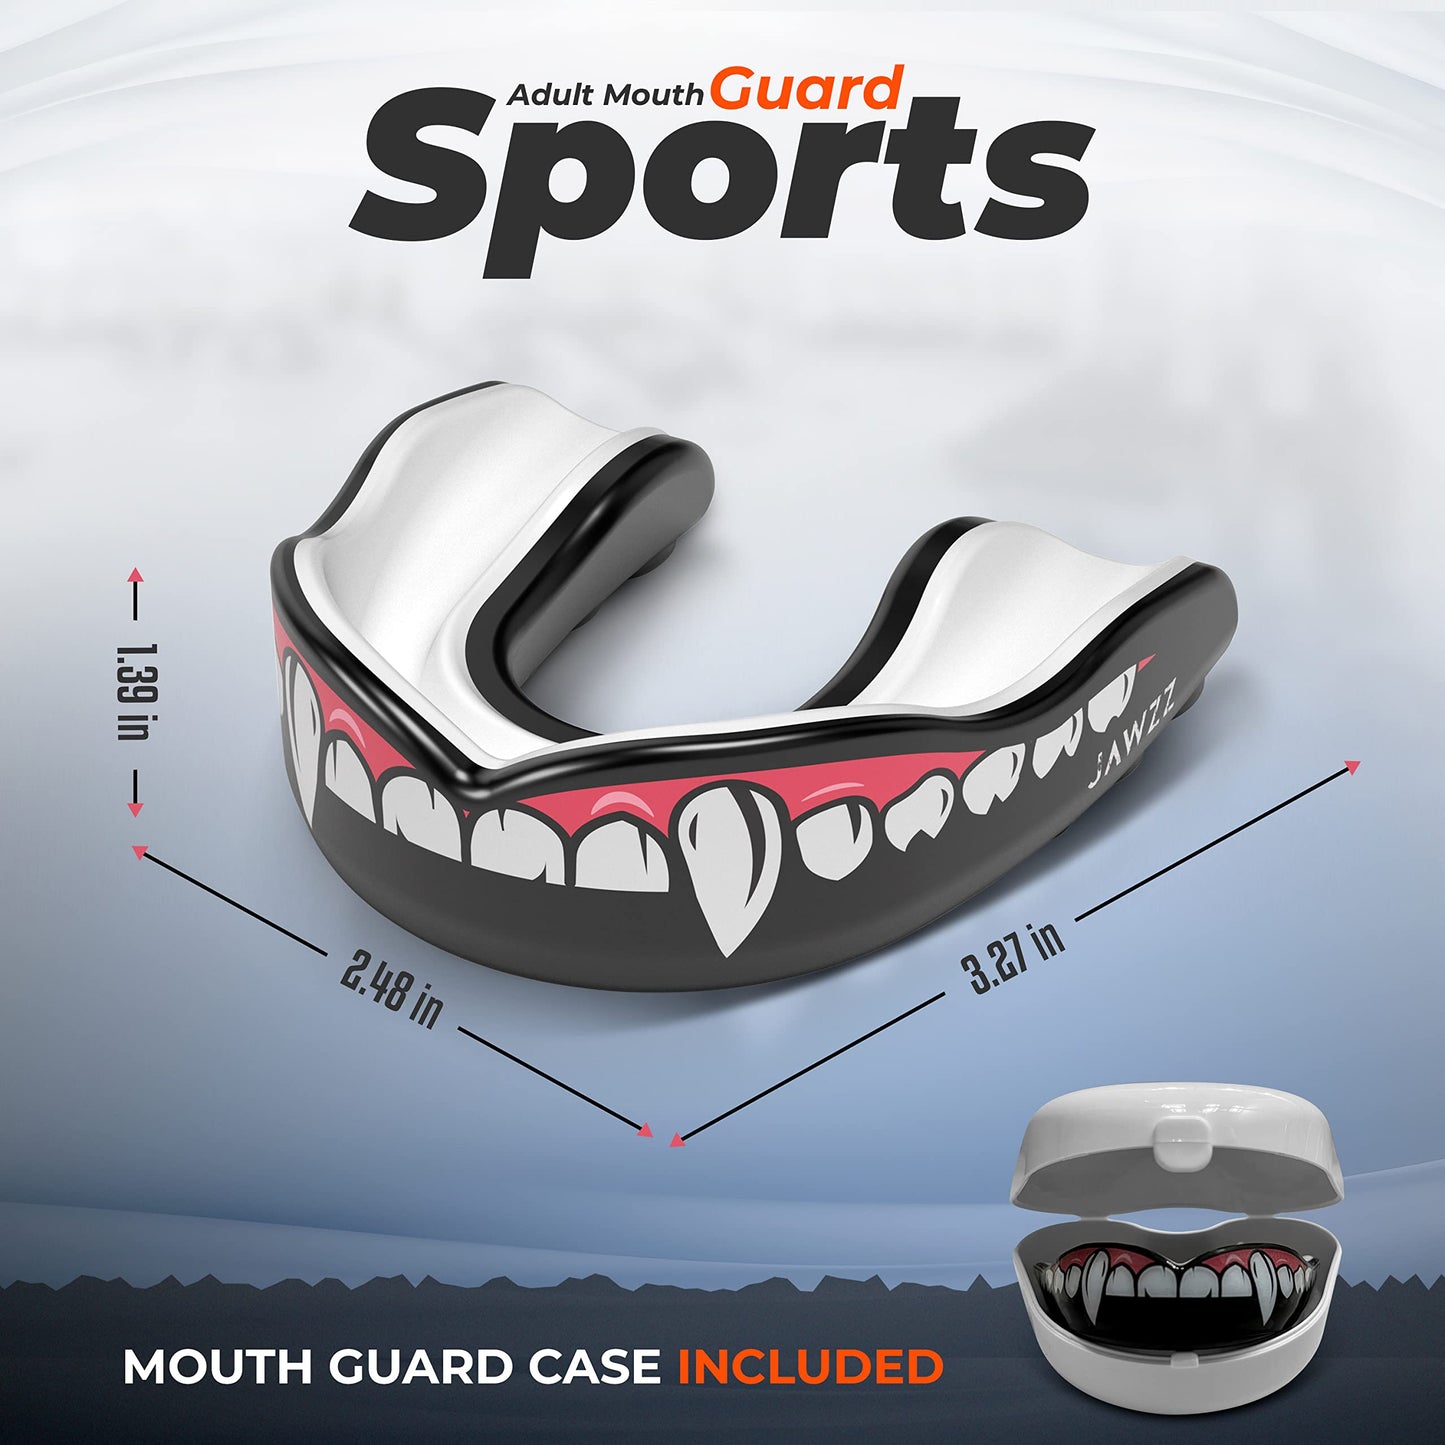 Adult Mouth Guard Sports – Boil and Bite Football Mouth Guard for Ages 12+ & Mouth Guard Case – Adult Mouthguard for Football, Boxing, Lacrosse, Hockey, Rugby & MMA by Jawzz Mouthguards | White